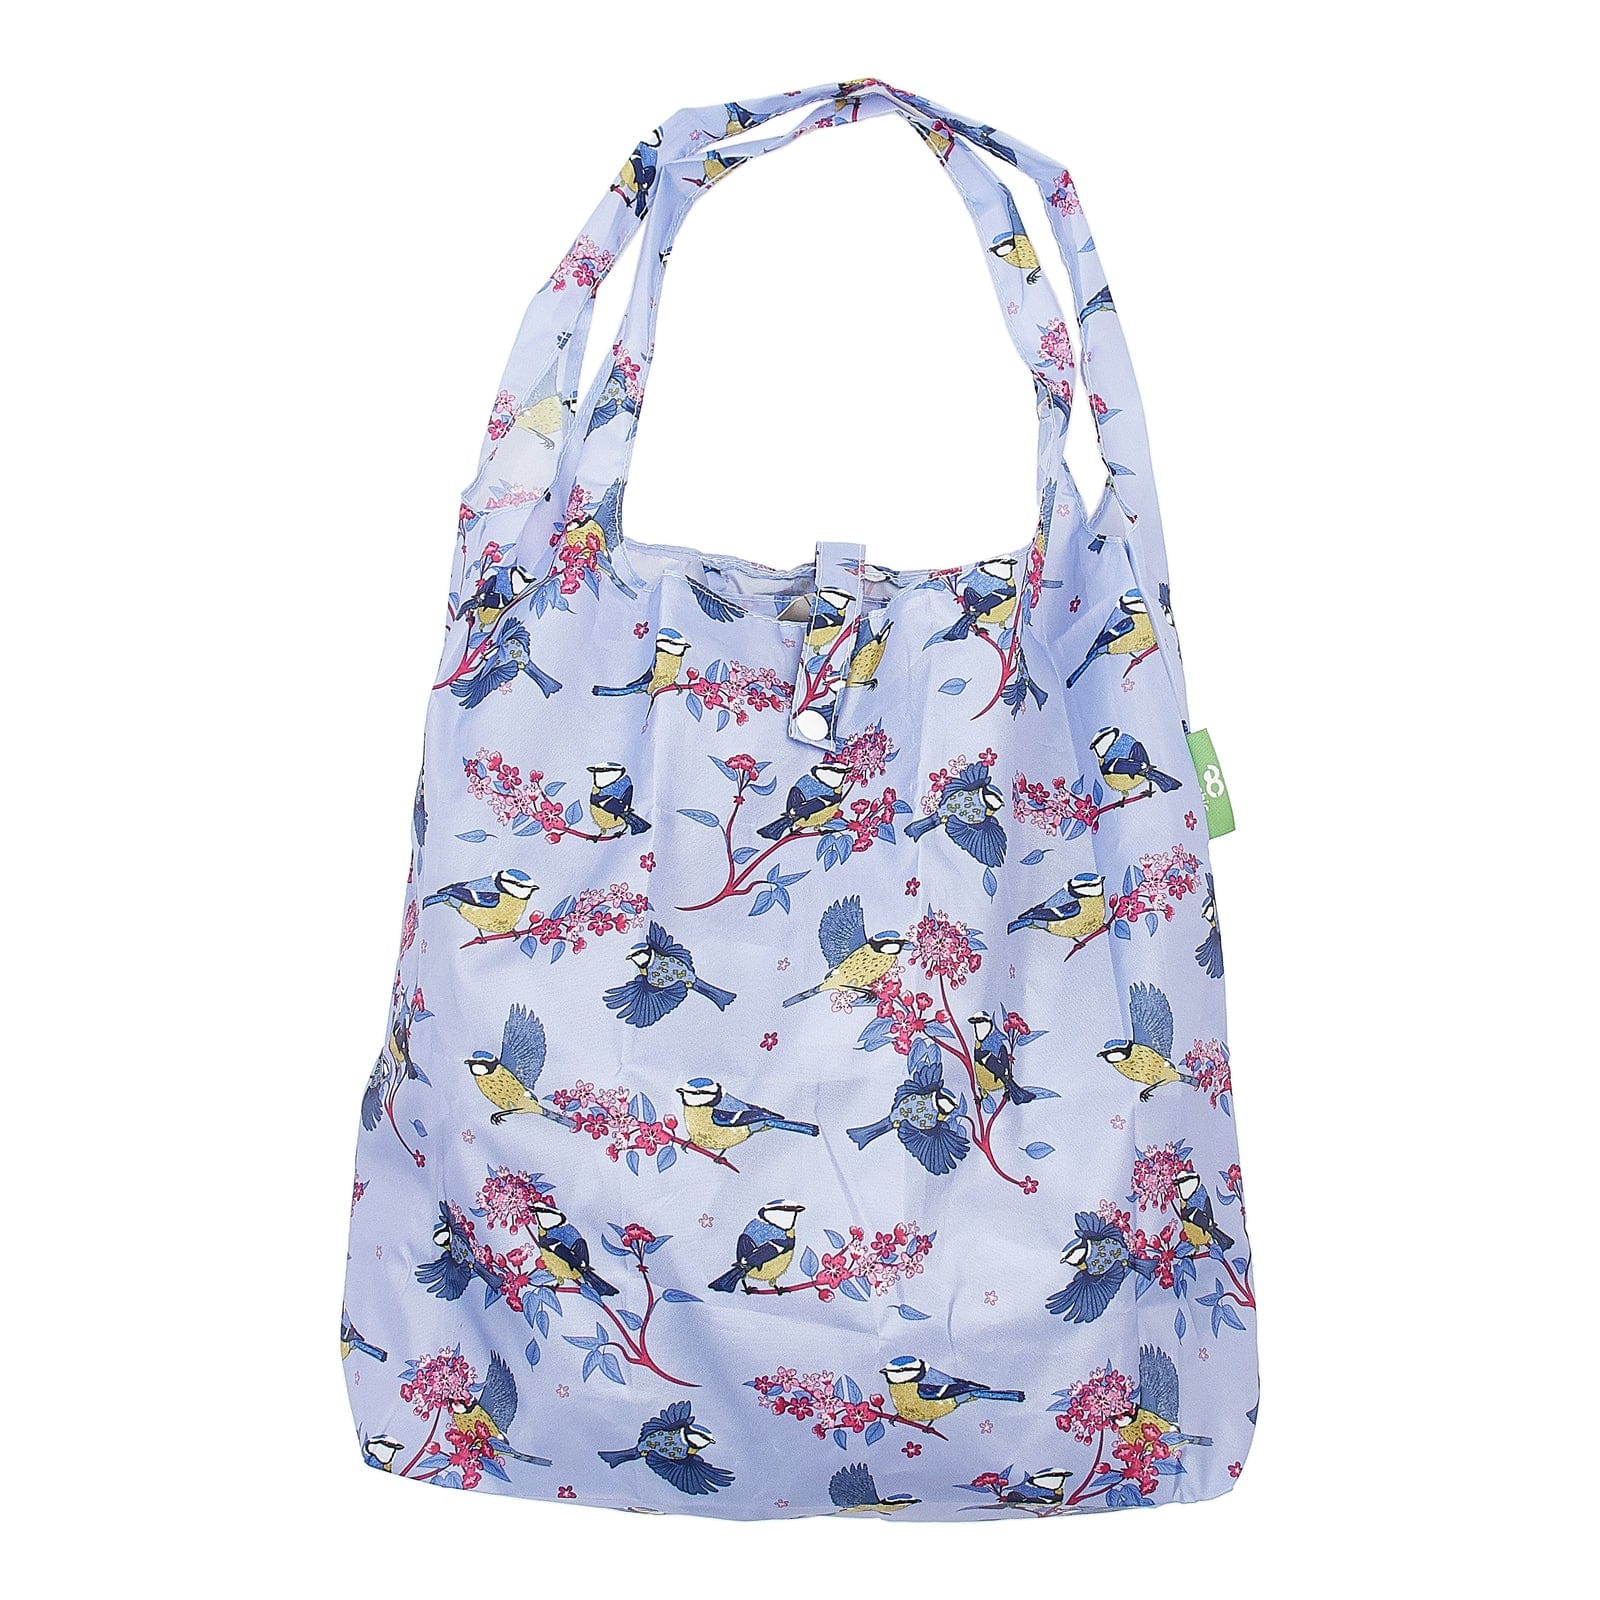 Eco Chic Eco Chic Lightweight Foldable Reusable Shopping Bag Blue Tits